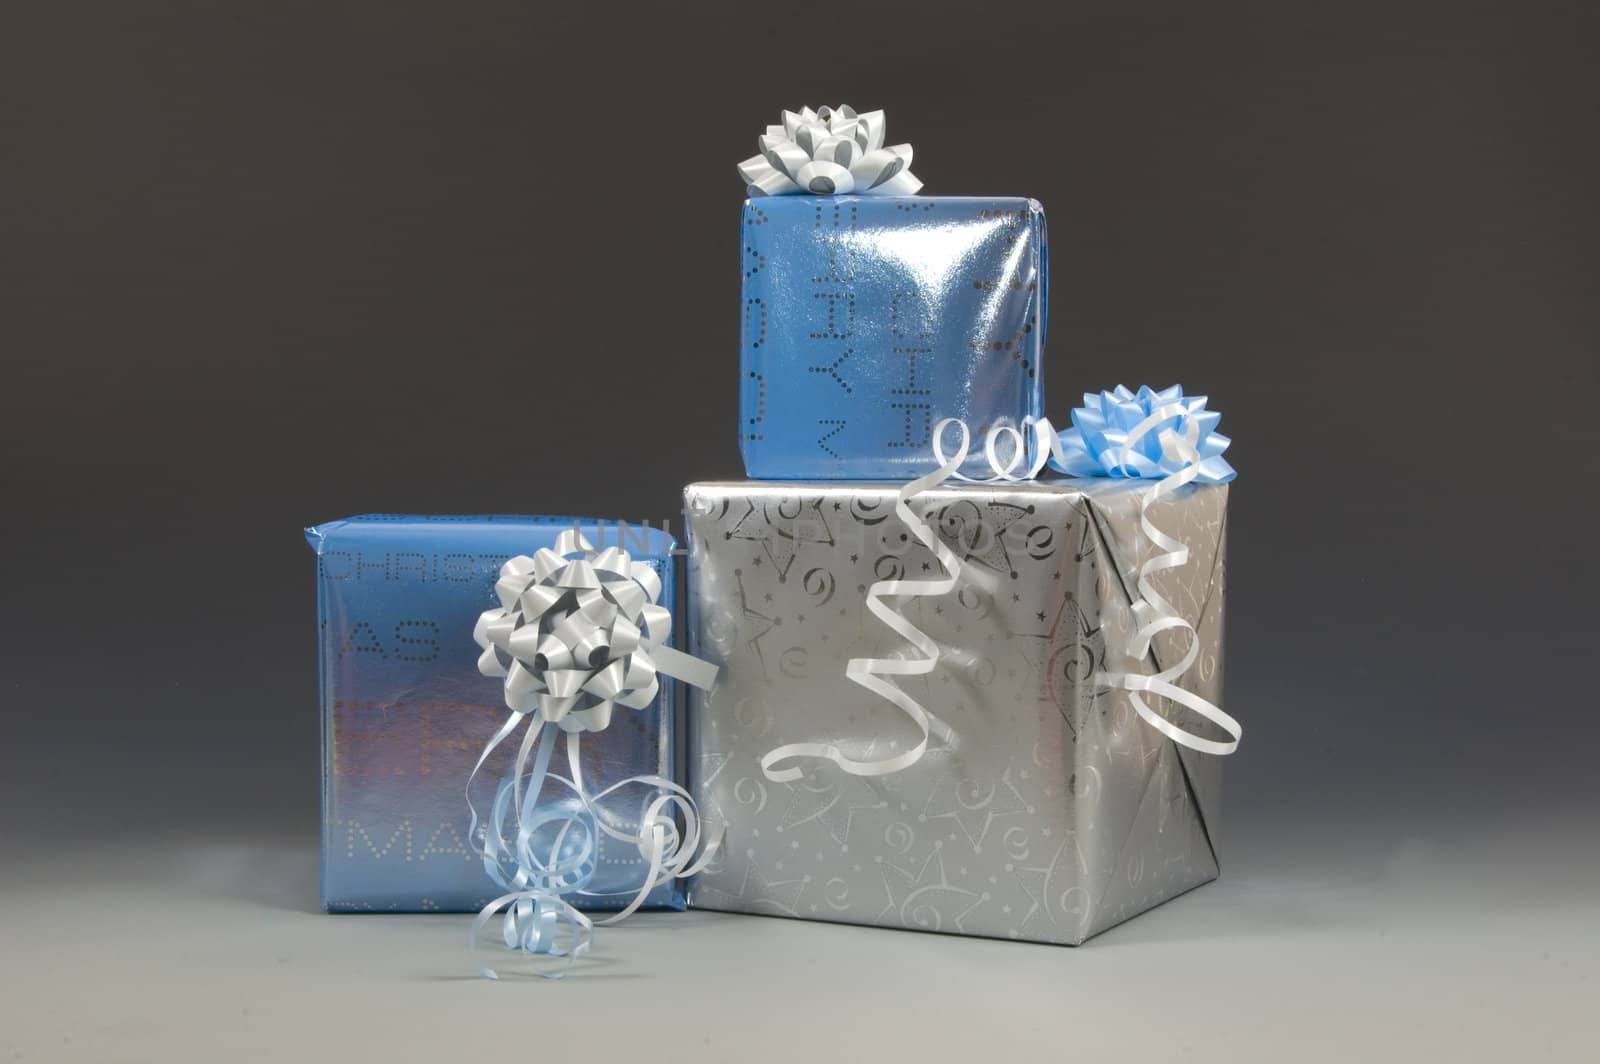 blue and silver christmas presents on a creme gray background